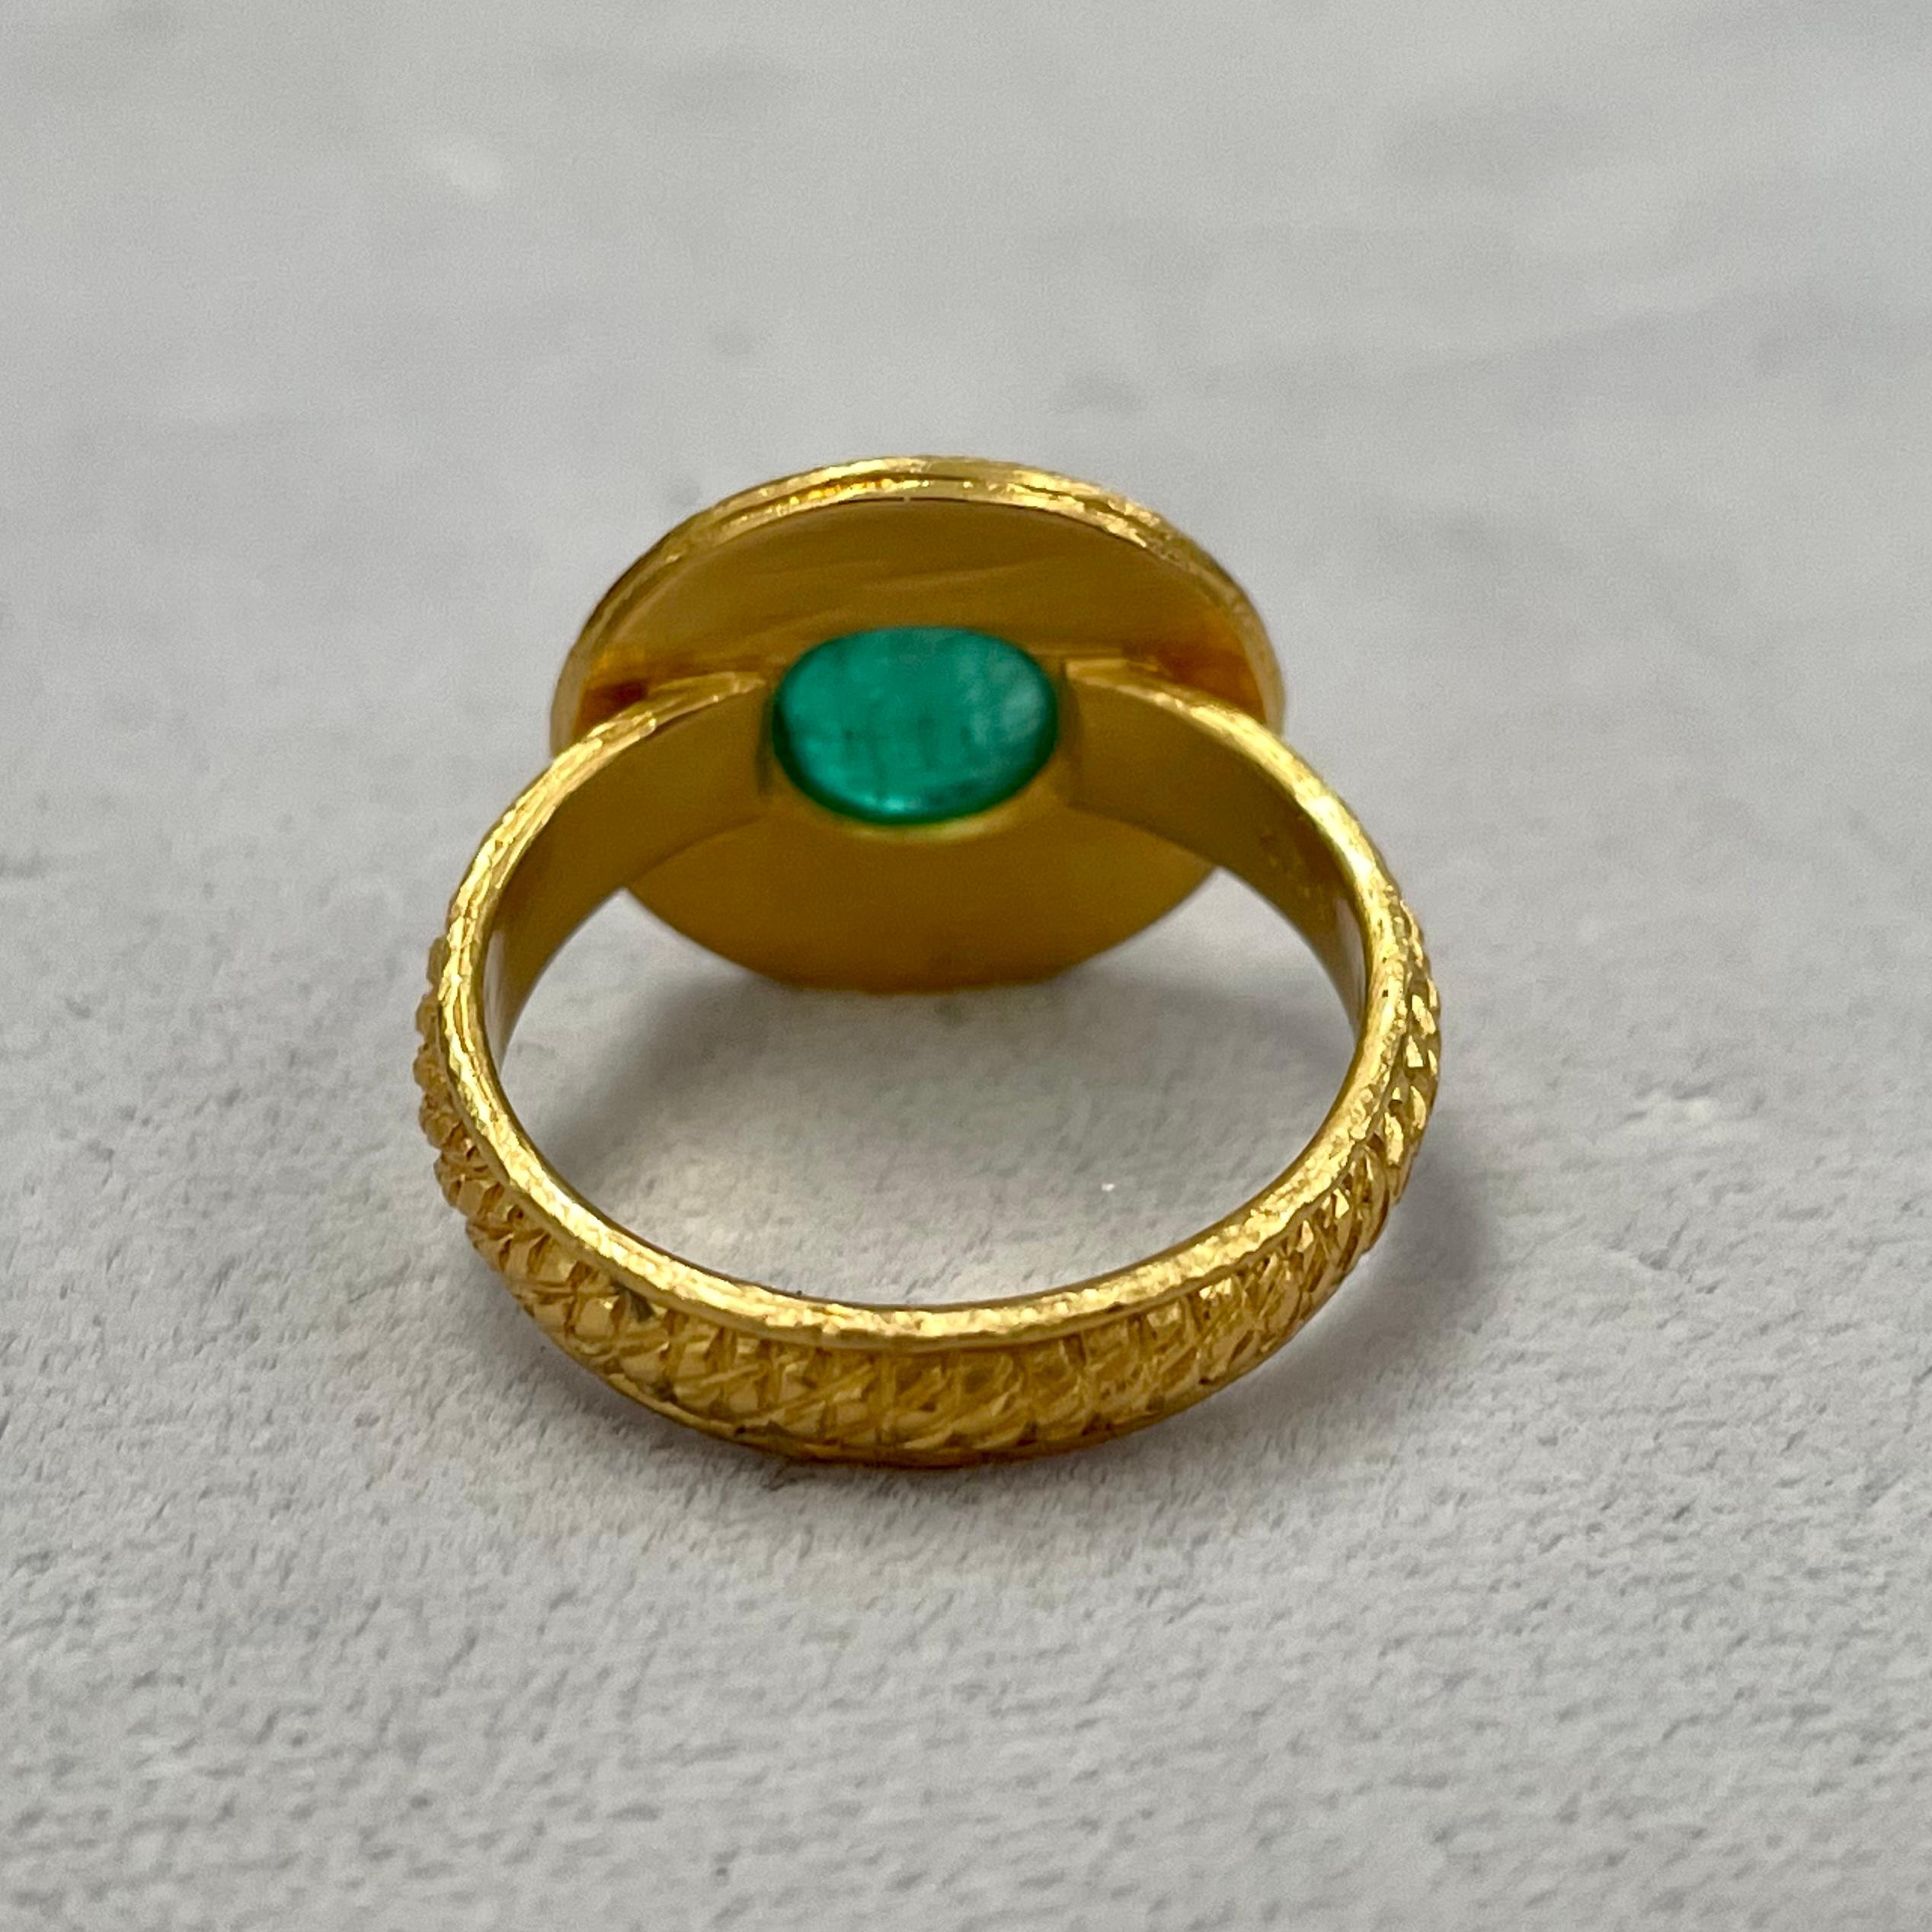 Steven Battelle 1.8 Carat Cabochon Emerald 22K Gold Ring In New Condition For Sale In Soquel, CA